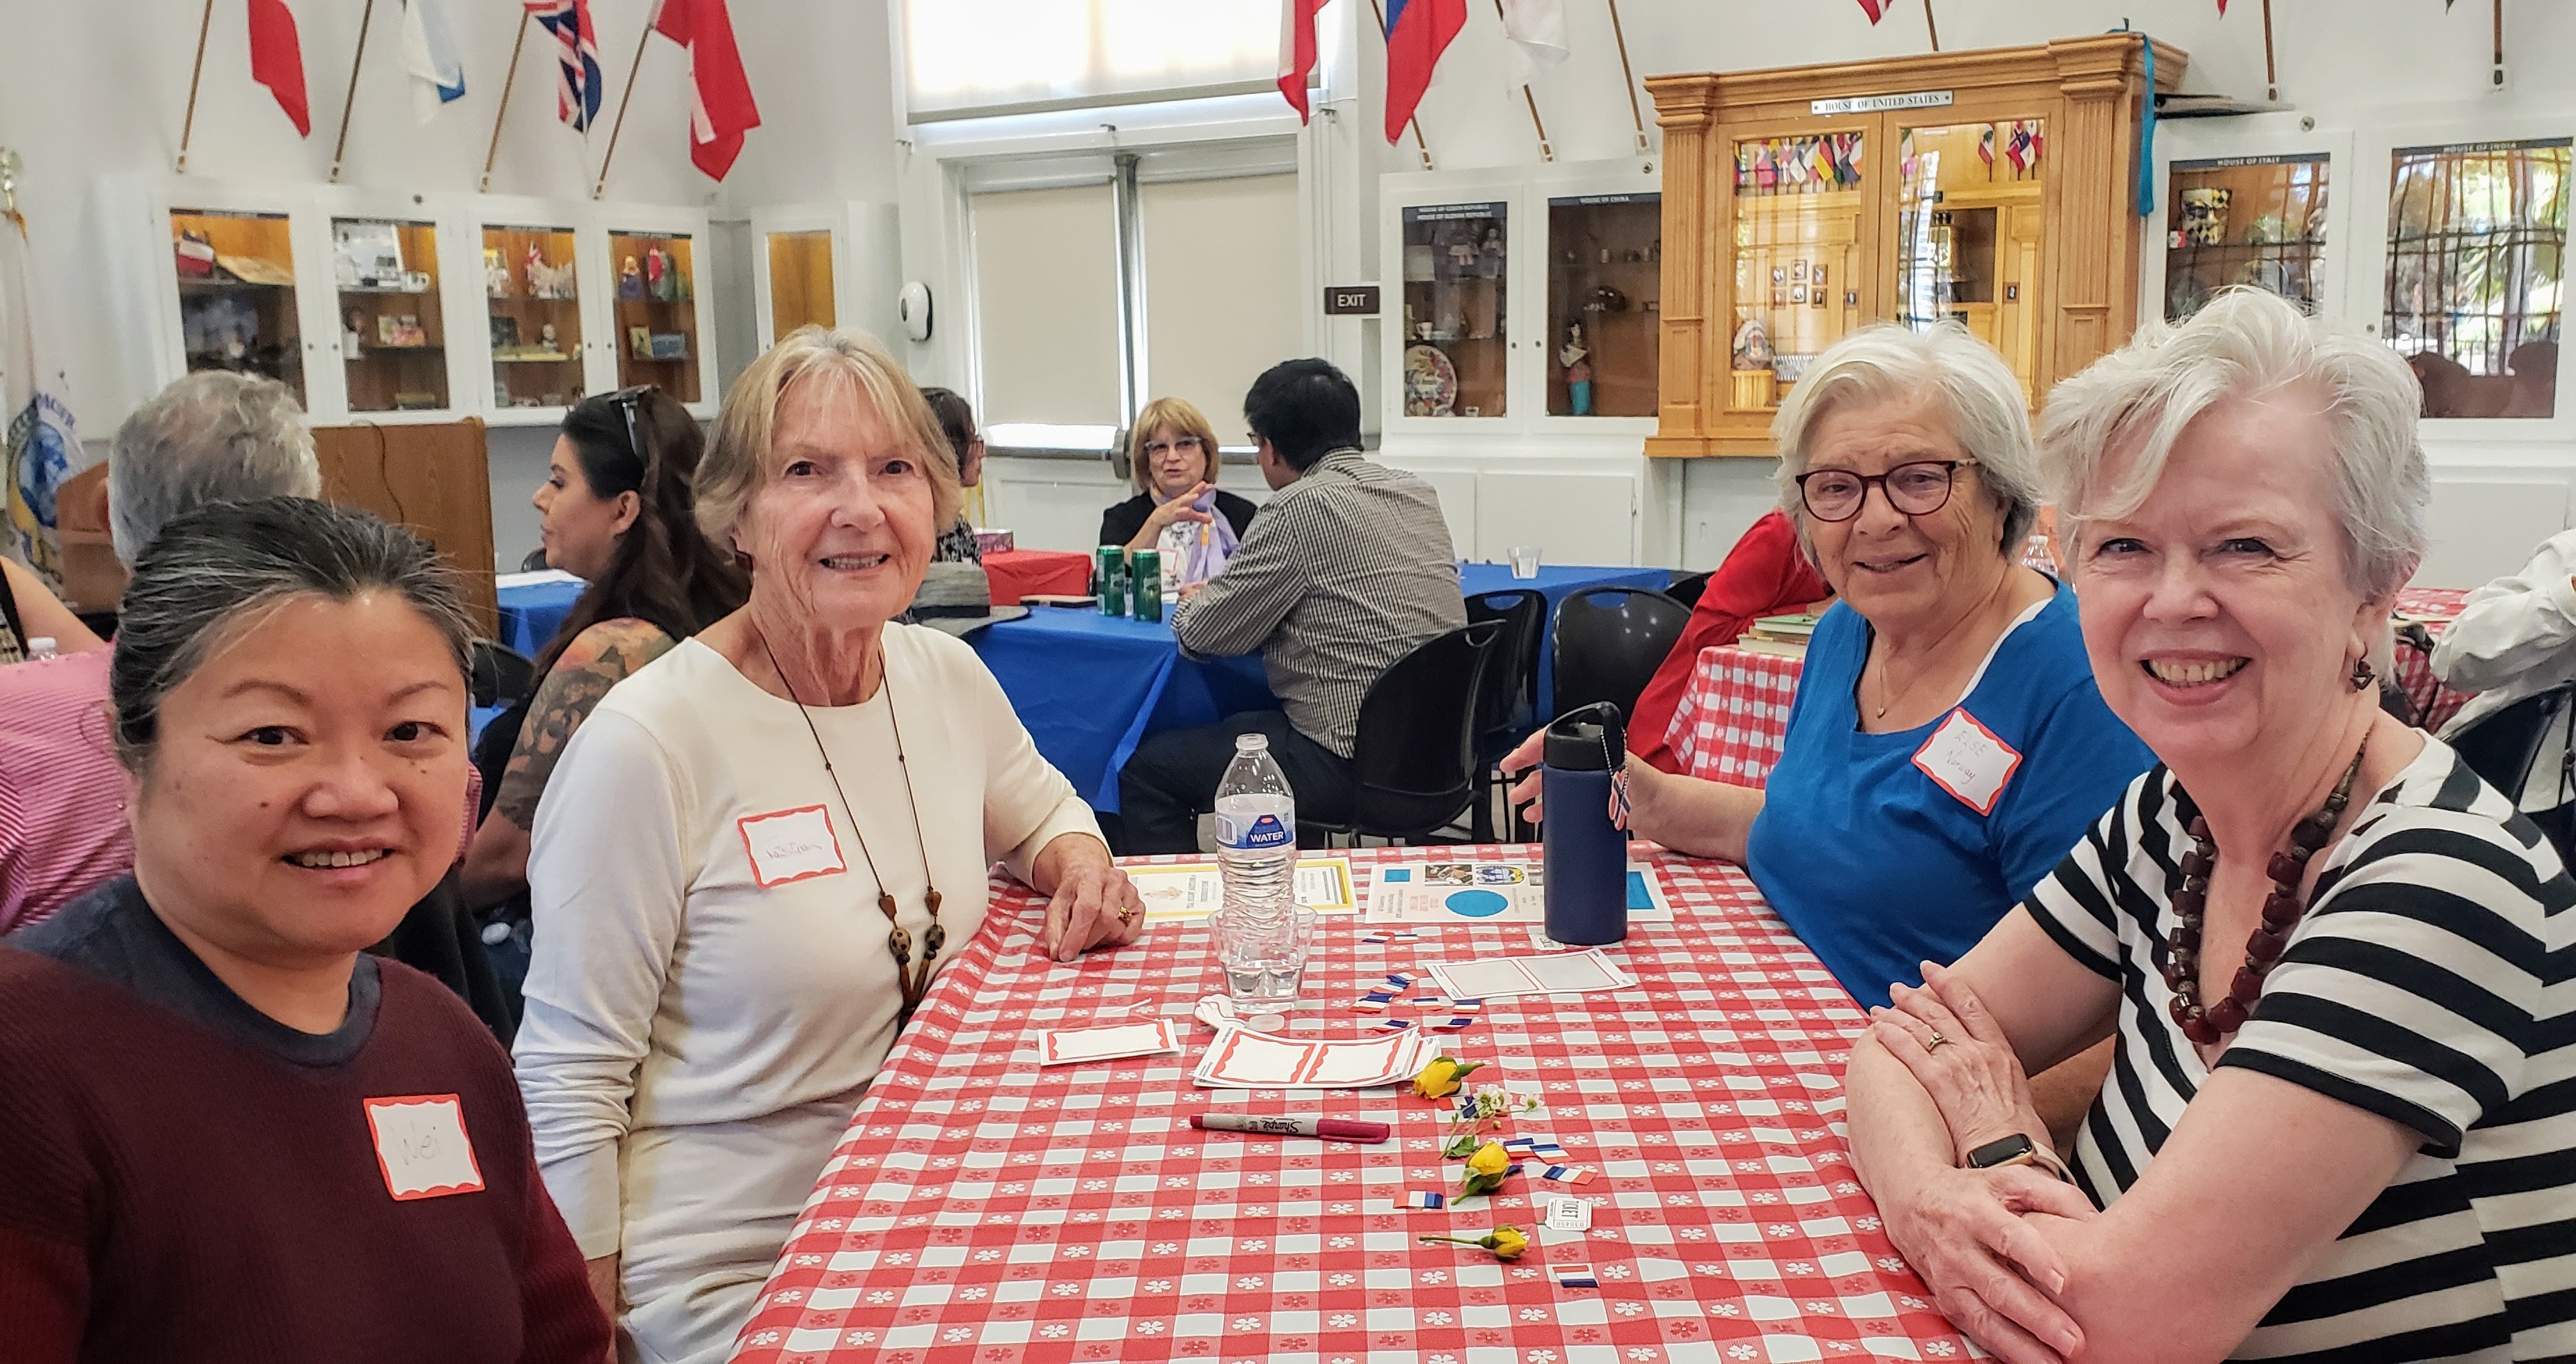 Ladies Auxiliary Luncheon - Tea Party